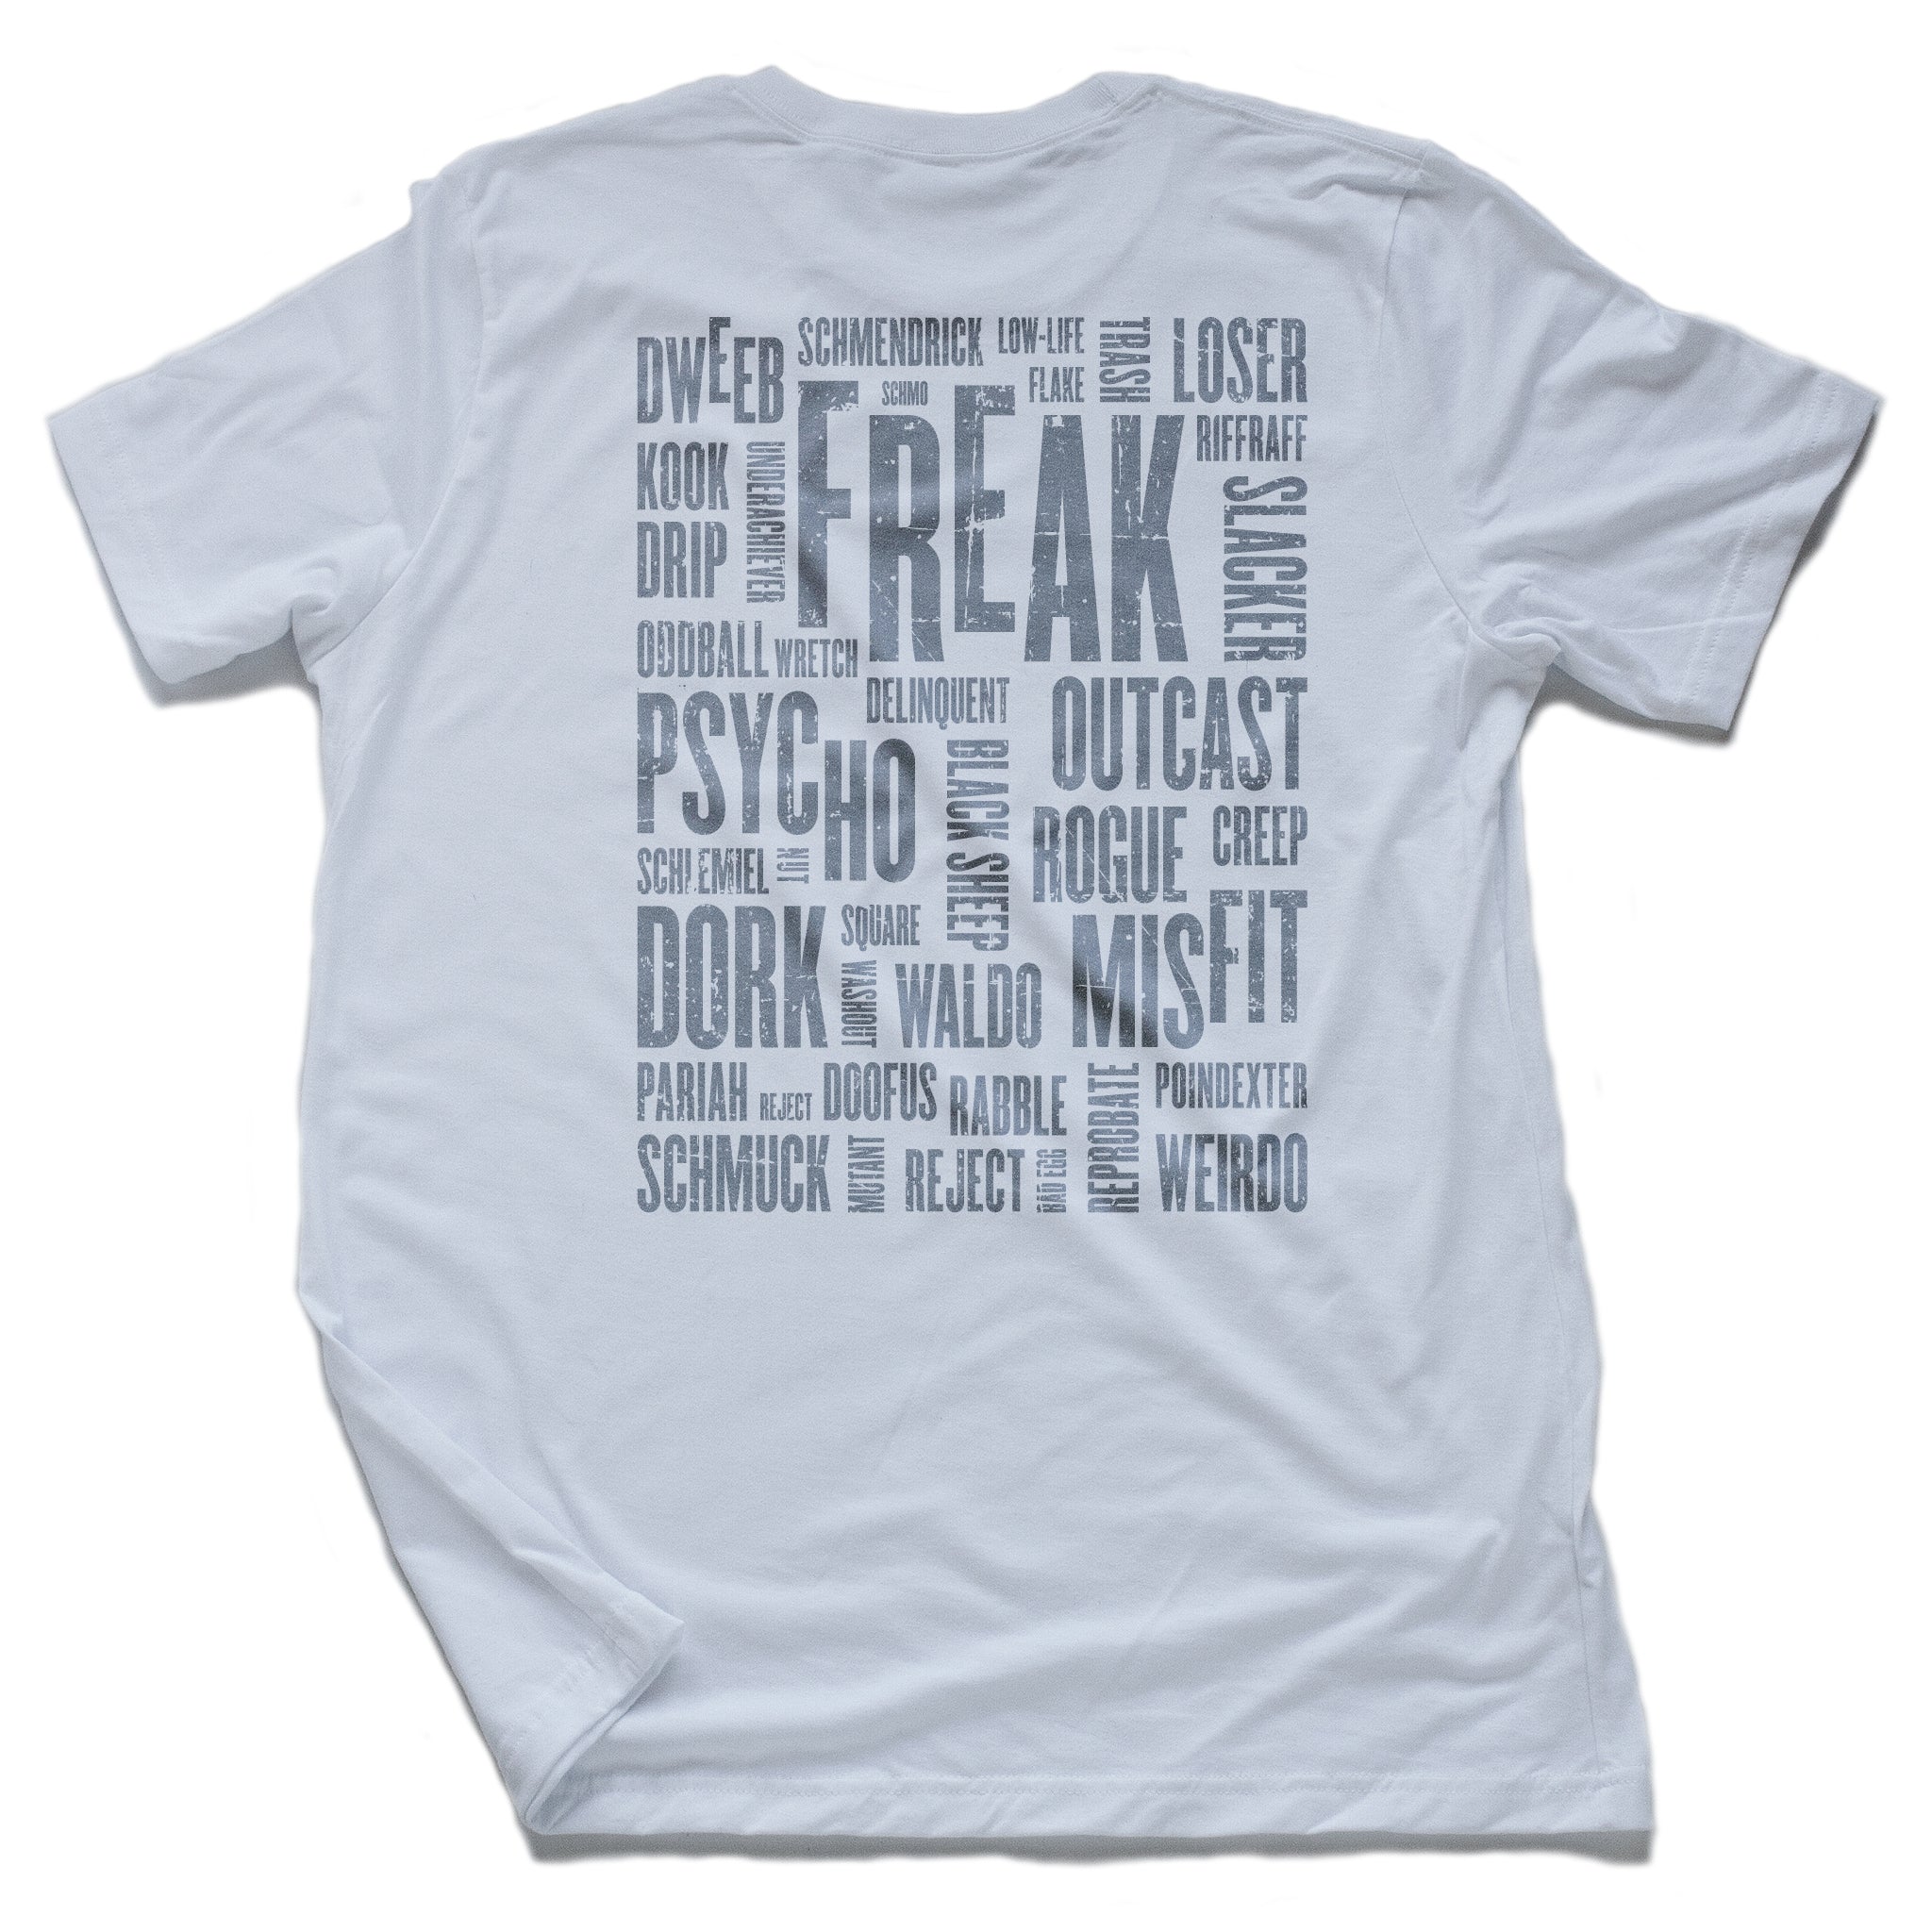 A sarcastic graphic t-shirt in white, featuring a collage of self-deprecating “nerd,” “freak,” and “geek” synonyms. By fashion brand YUF, from wolfsaint.net